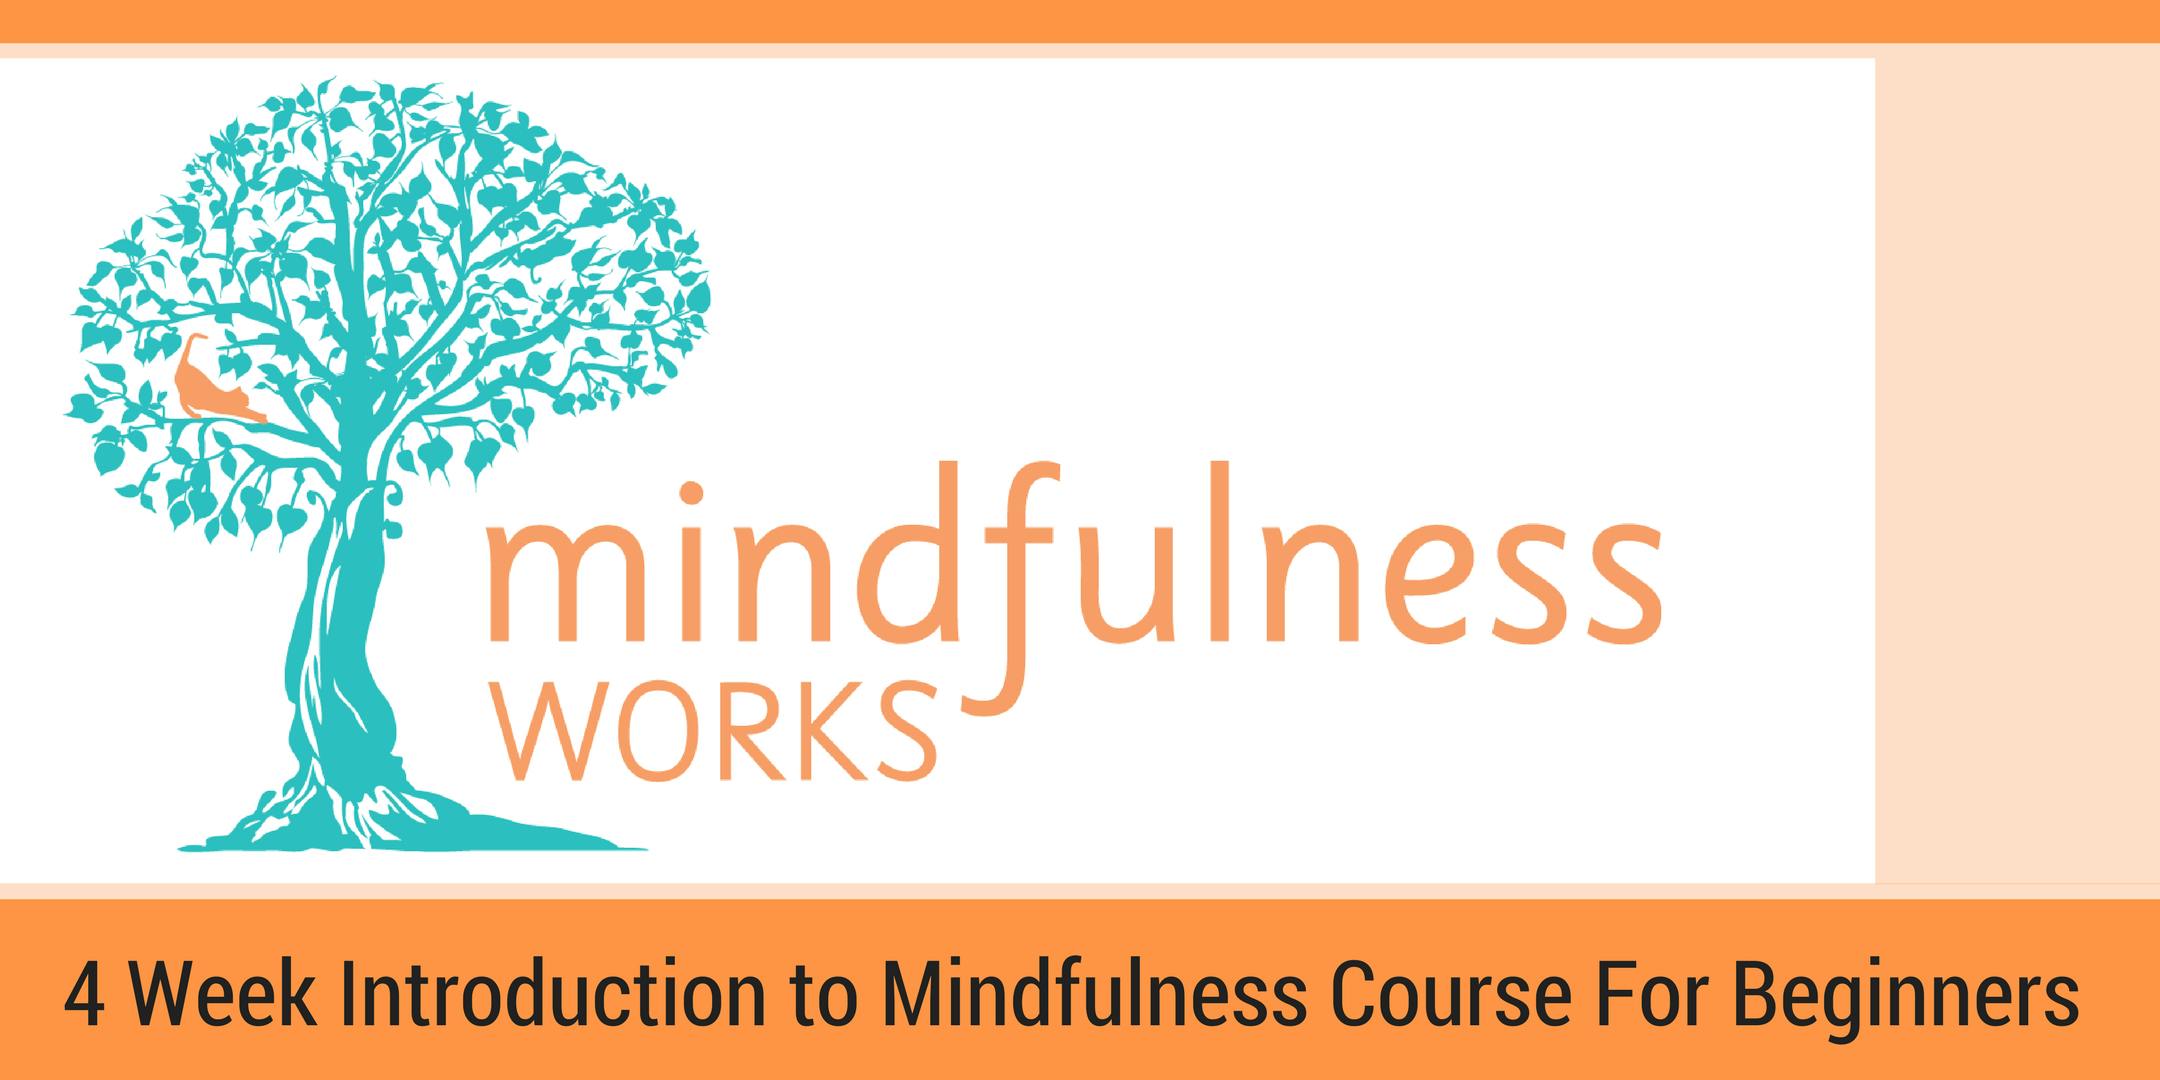 Petone Introduction to Mindfulness and Meditation – 4 Week course